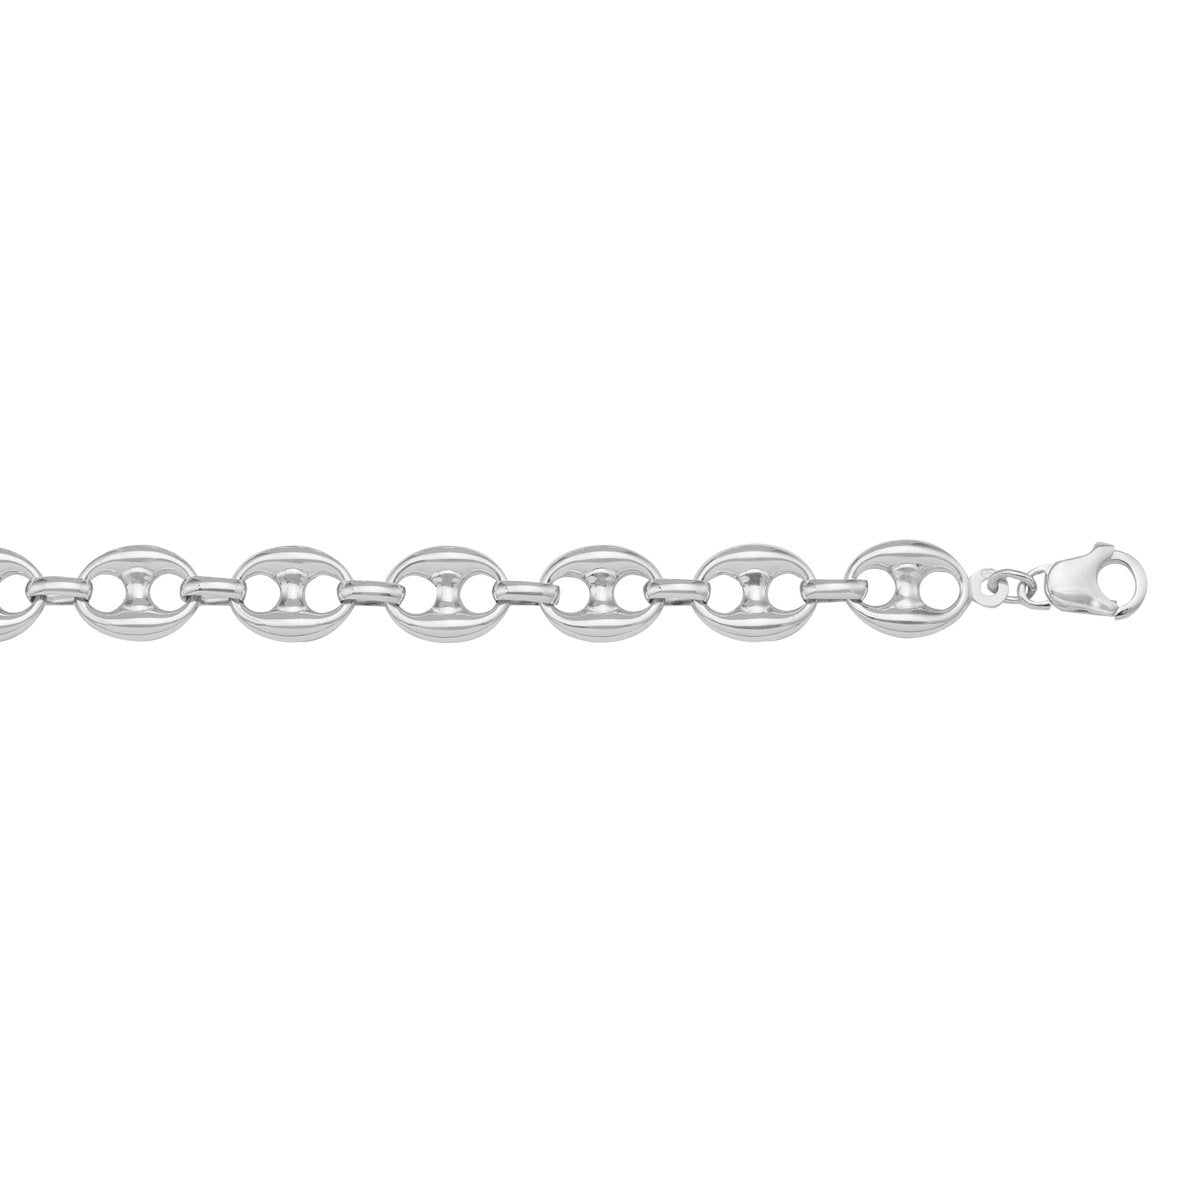 BRACELETS WHITE GOLD HOLLOW PUFFED ANCHOR LINK (LOBSTER CLASP) CHAIN